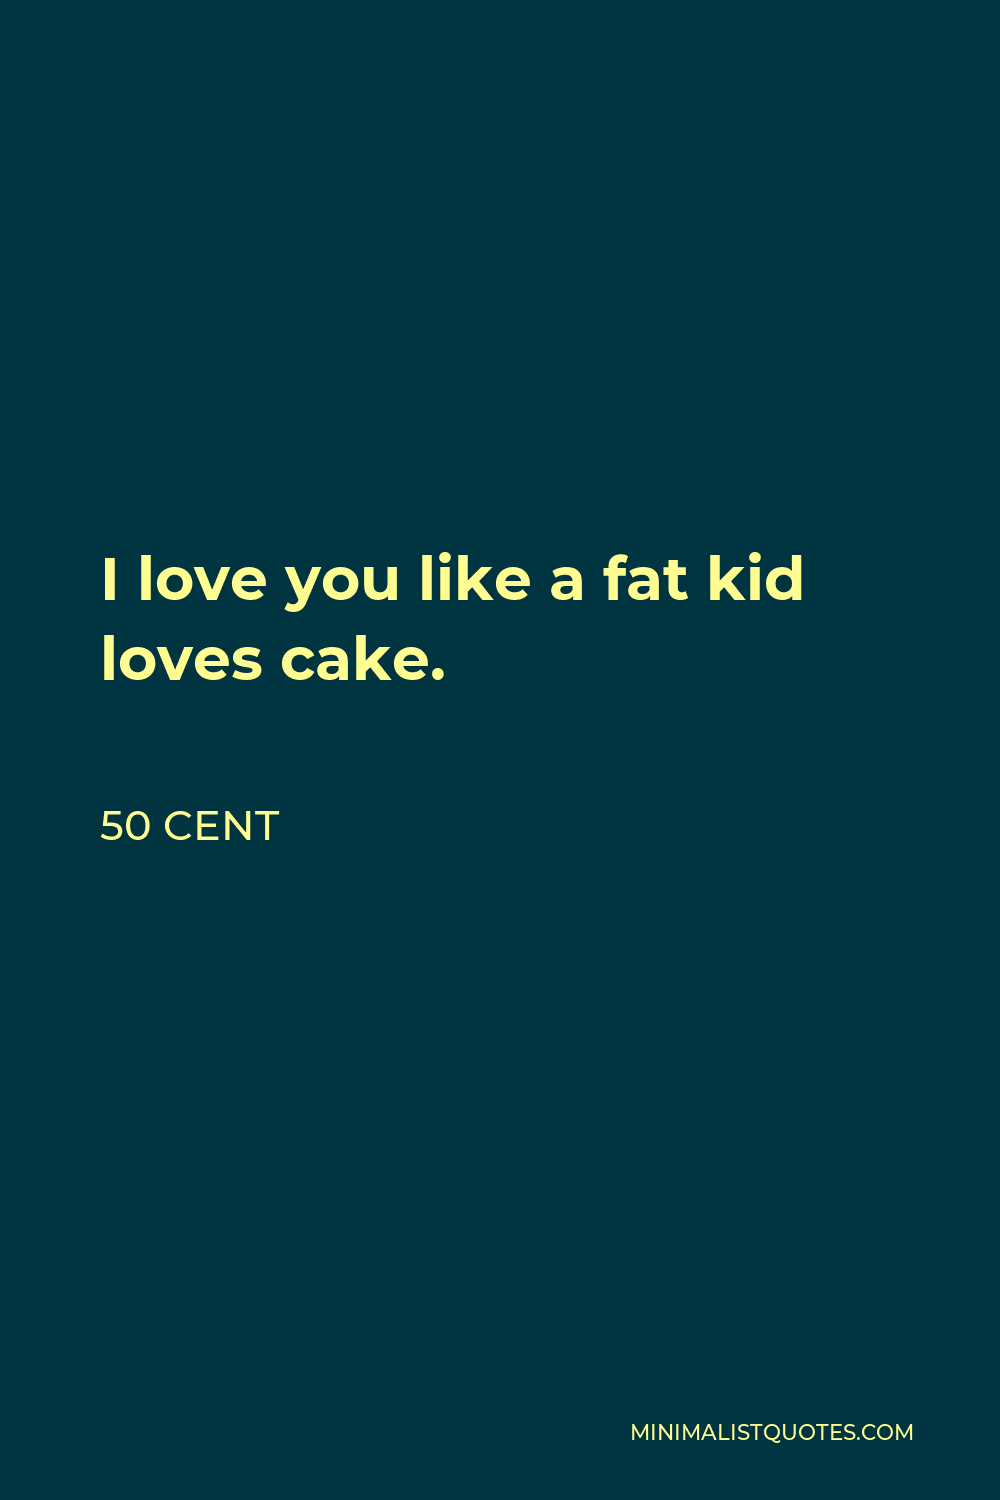 50 Cent Quote - I love you like a fat kid loves cake.